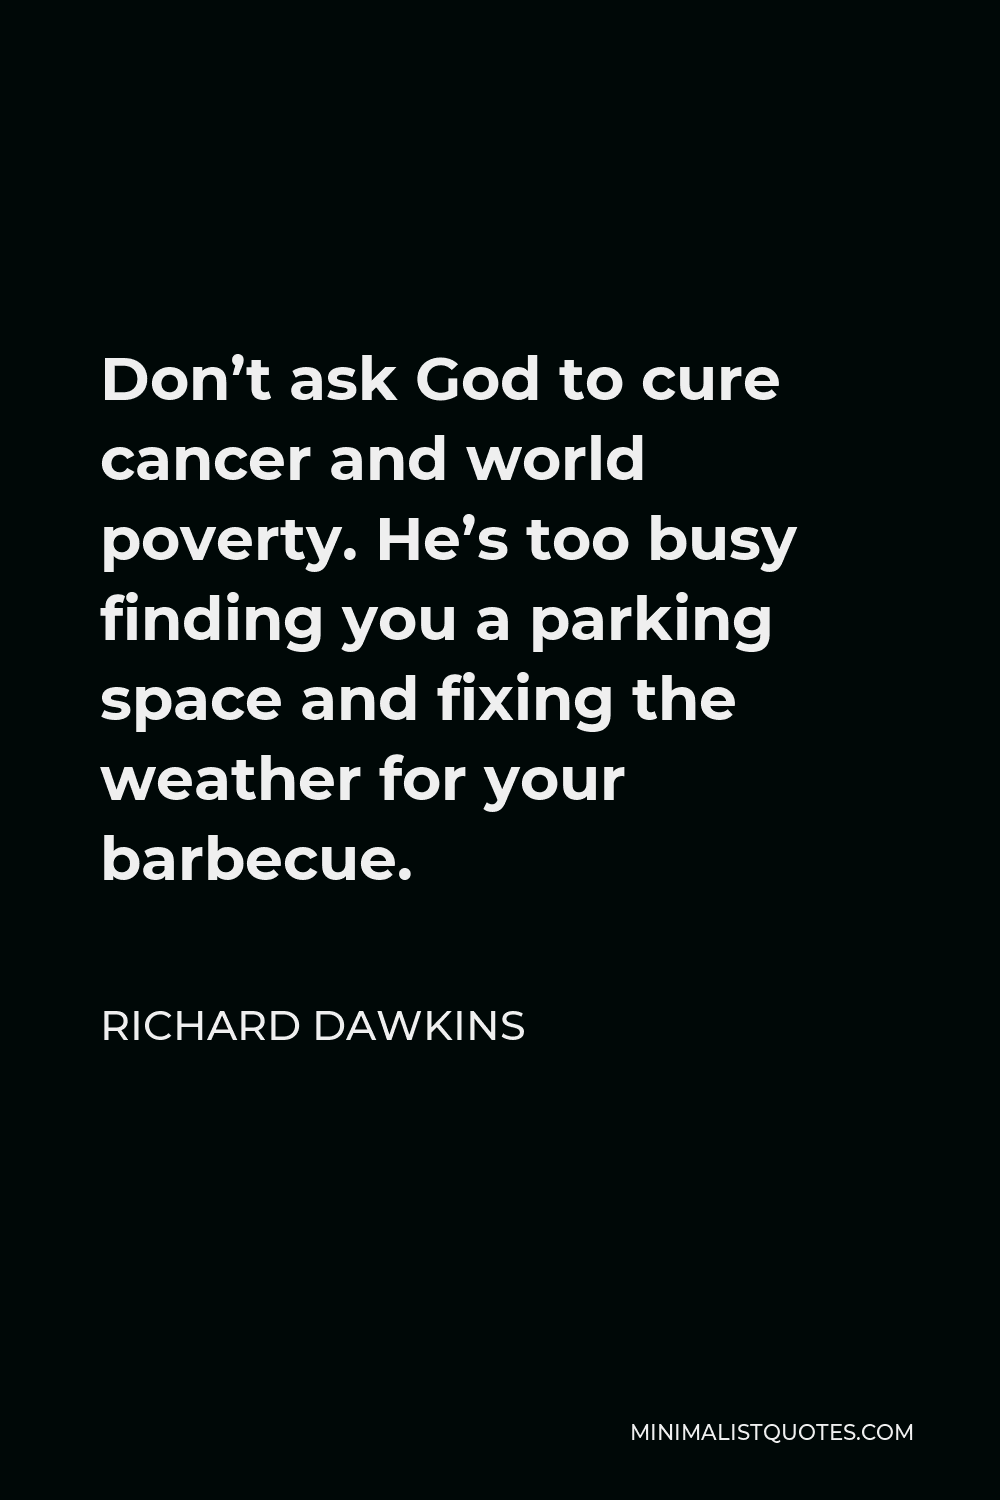 Richard Dawkins Quote - Don’t ask God to cure cancer and world poverty. He’s too busy finding you a parking space and fixing the weather for your barbecue.